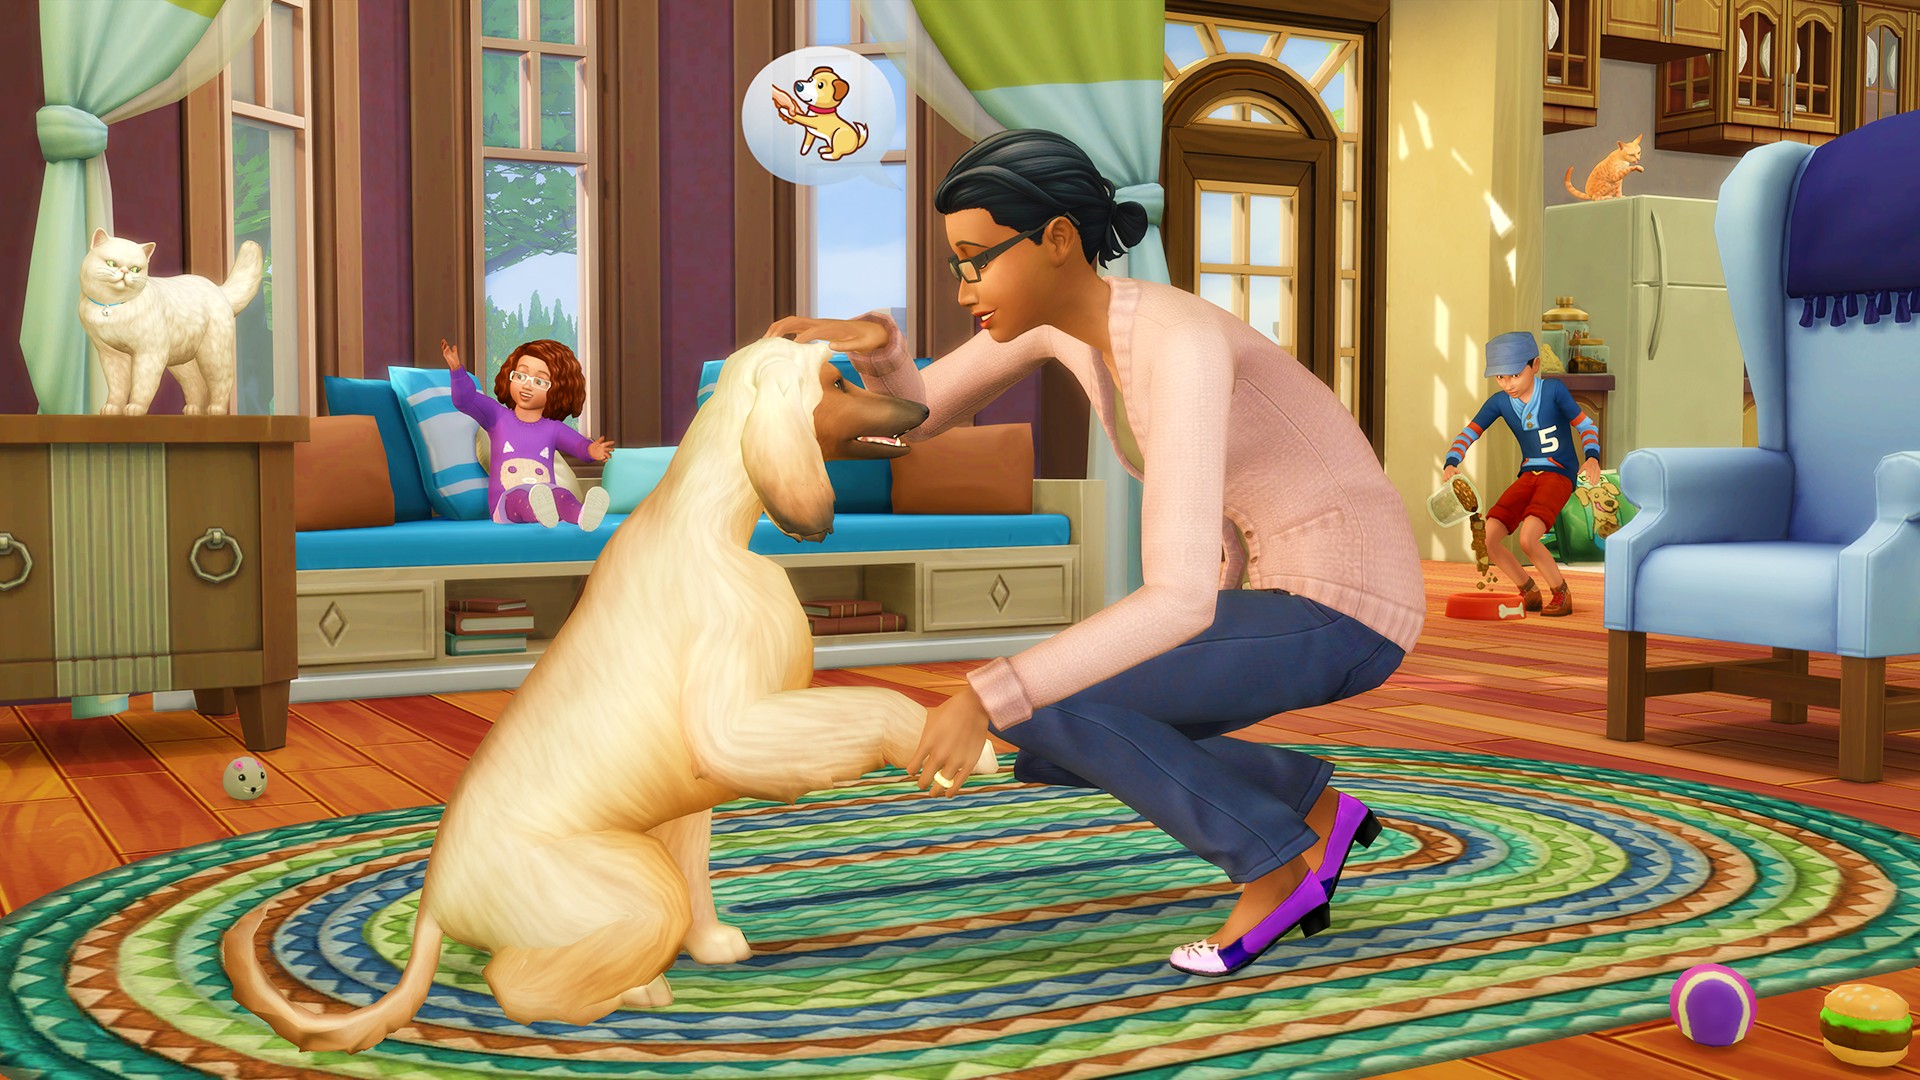 Sims 4 pets transformed into humans by old Cats and Dogs bug